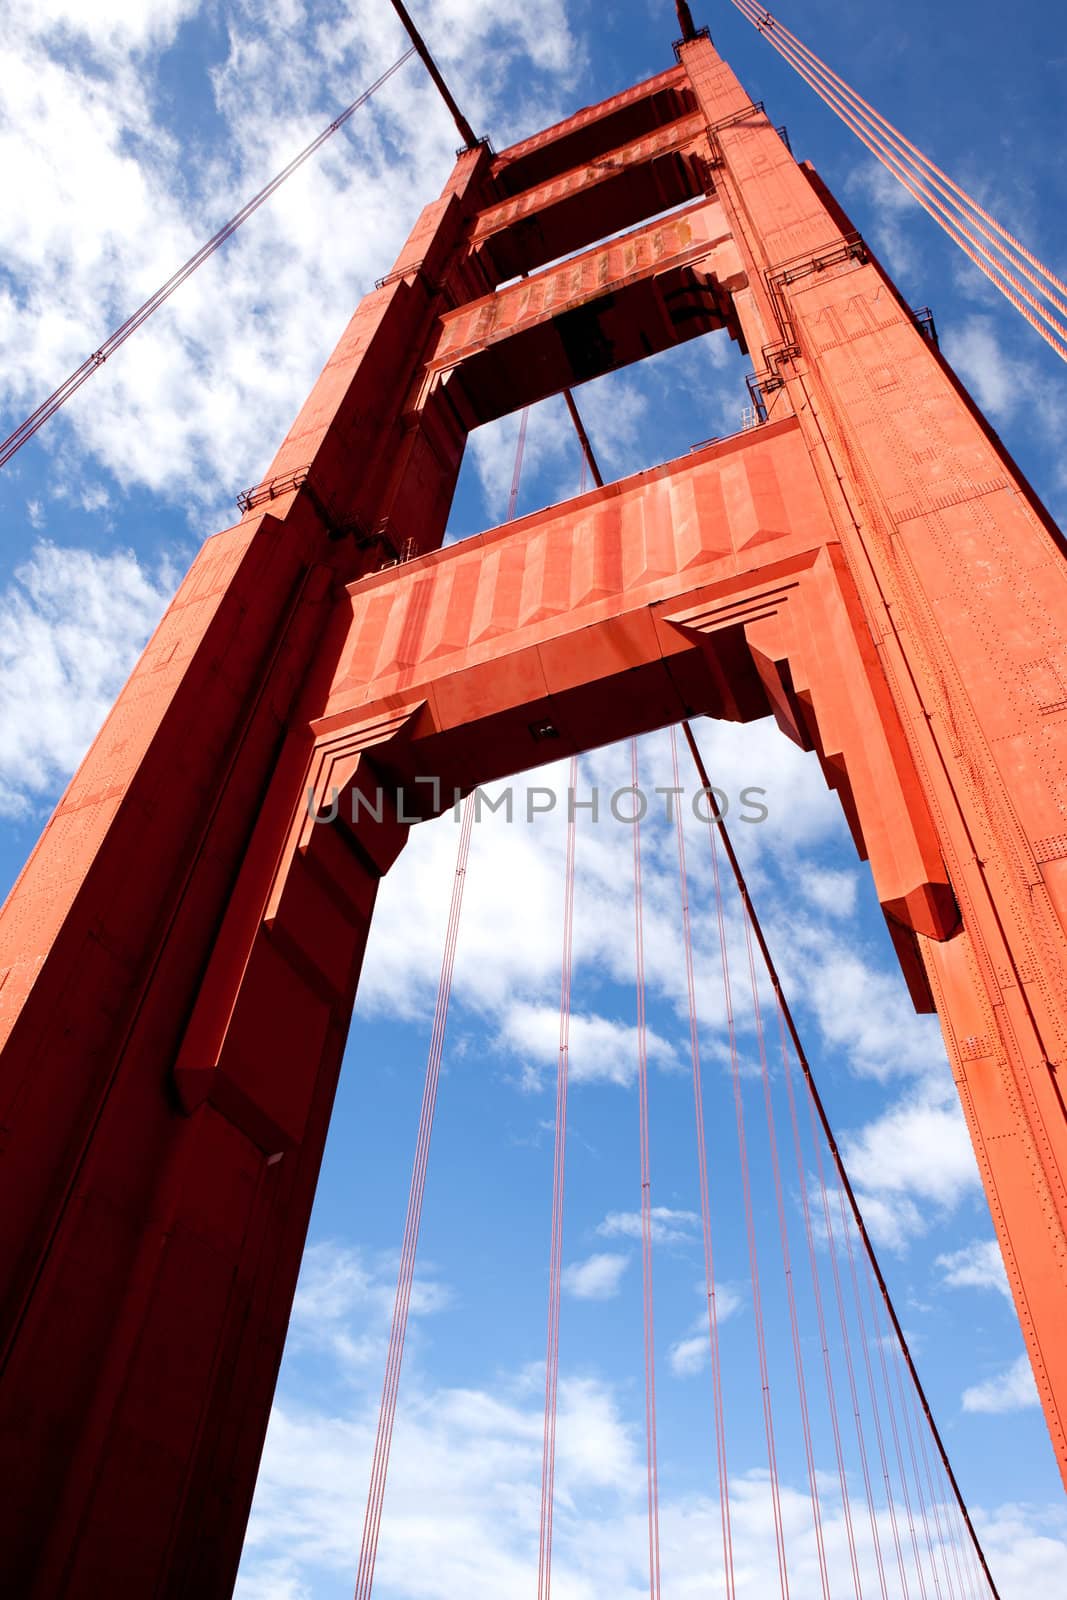 A detail of one of the Golden Gate Bridge towers.